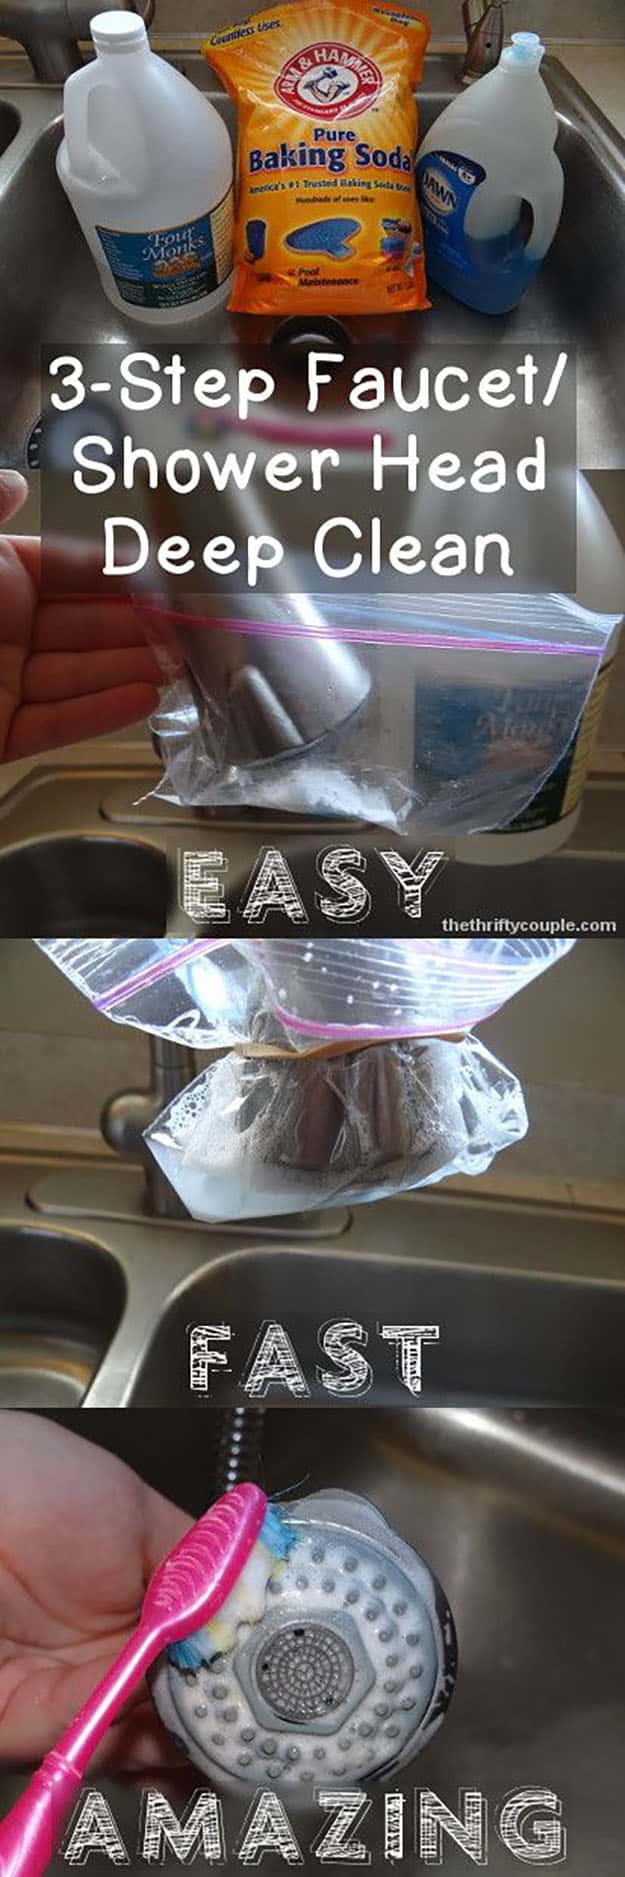 DIY Bathroom Cleaning Hacks | Shower Head Cleaning Tips and Tricks | DIY Projects & Crafts by DIY JOY at http://diyjoy.com/cleaning-tips-life-hacks